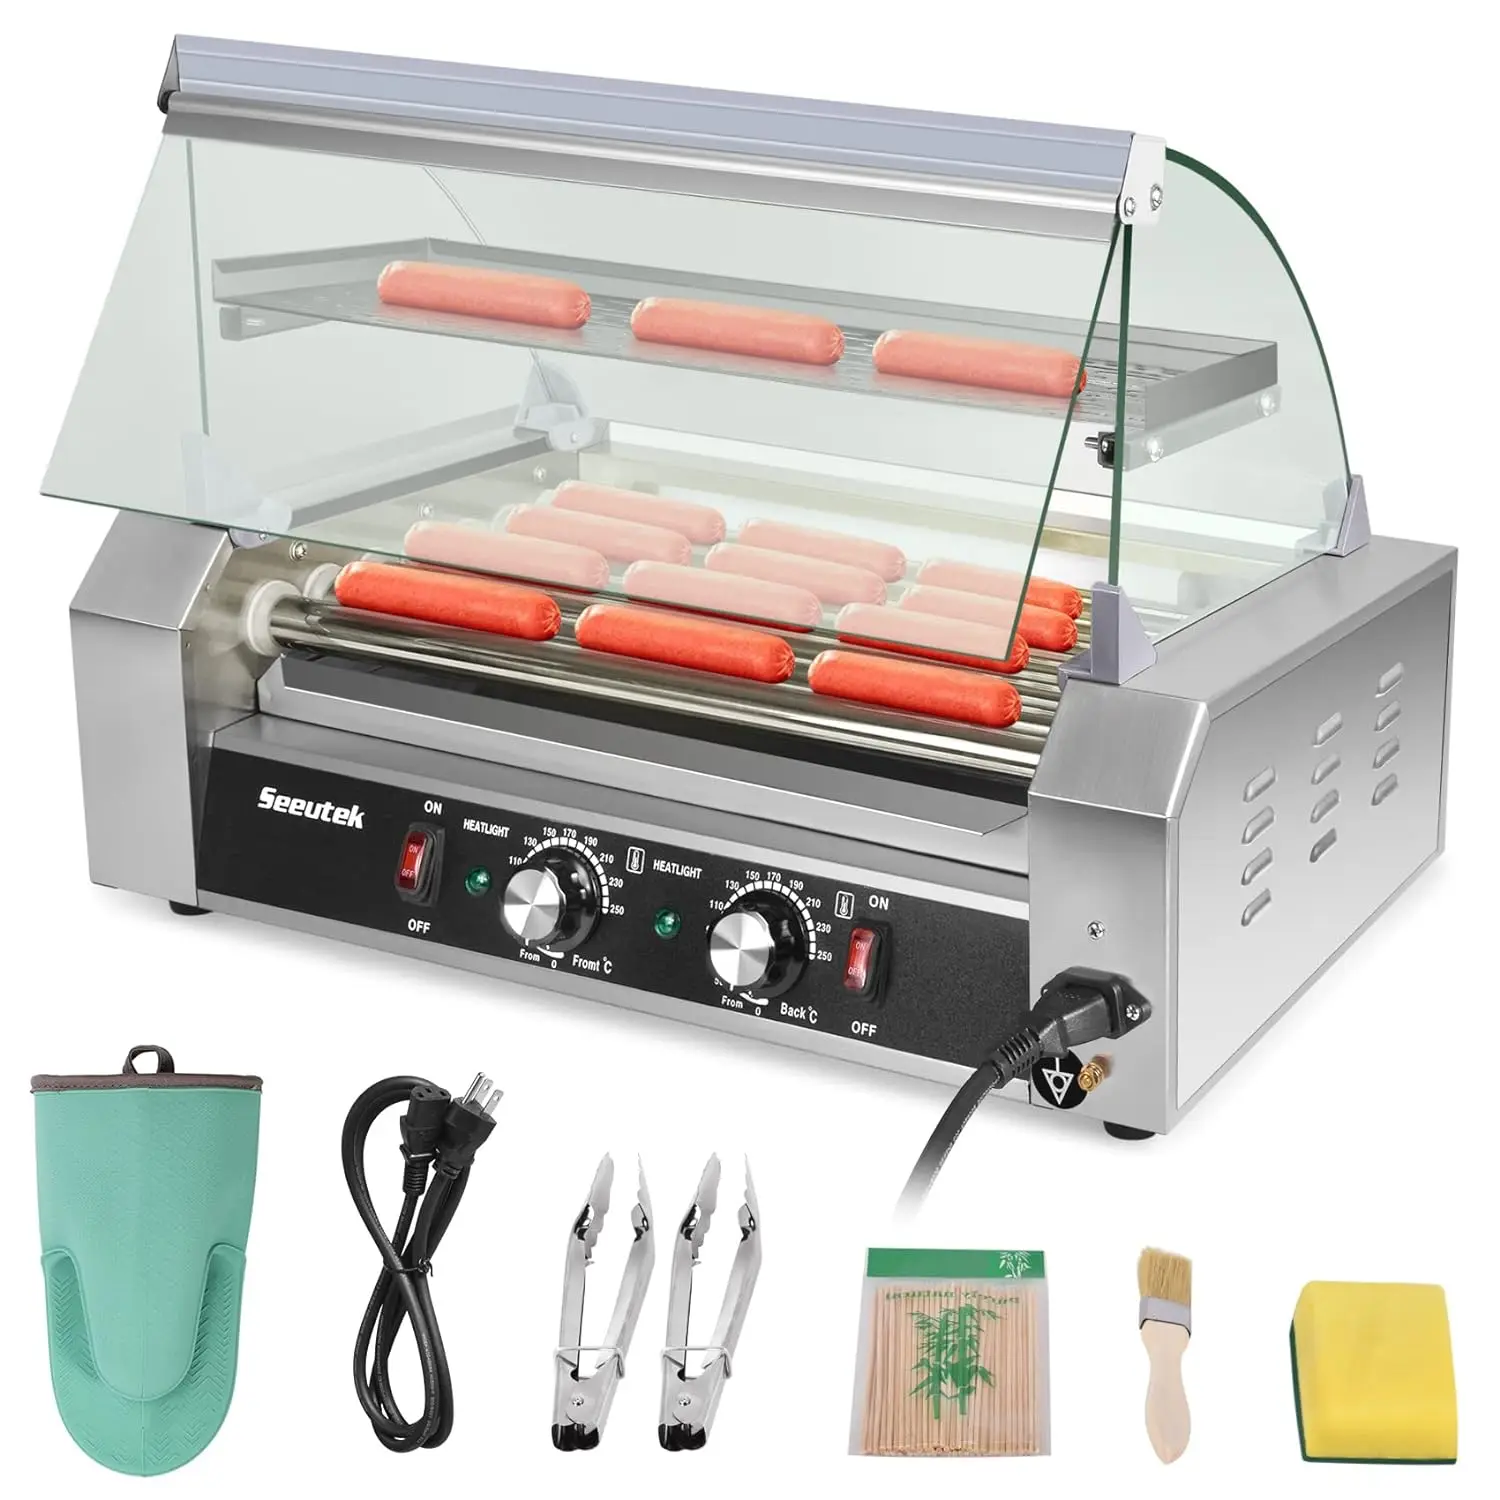 

Hot Dog Roller Machine, 7 Stainless Steel Hot Dog Rollers with Mesh , Dust Cover, Oil Pan, Dual Temp Control and LED Light, 18 H